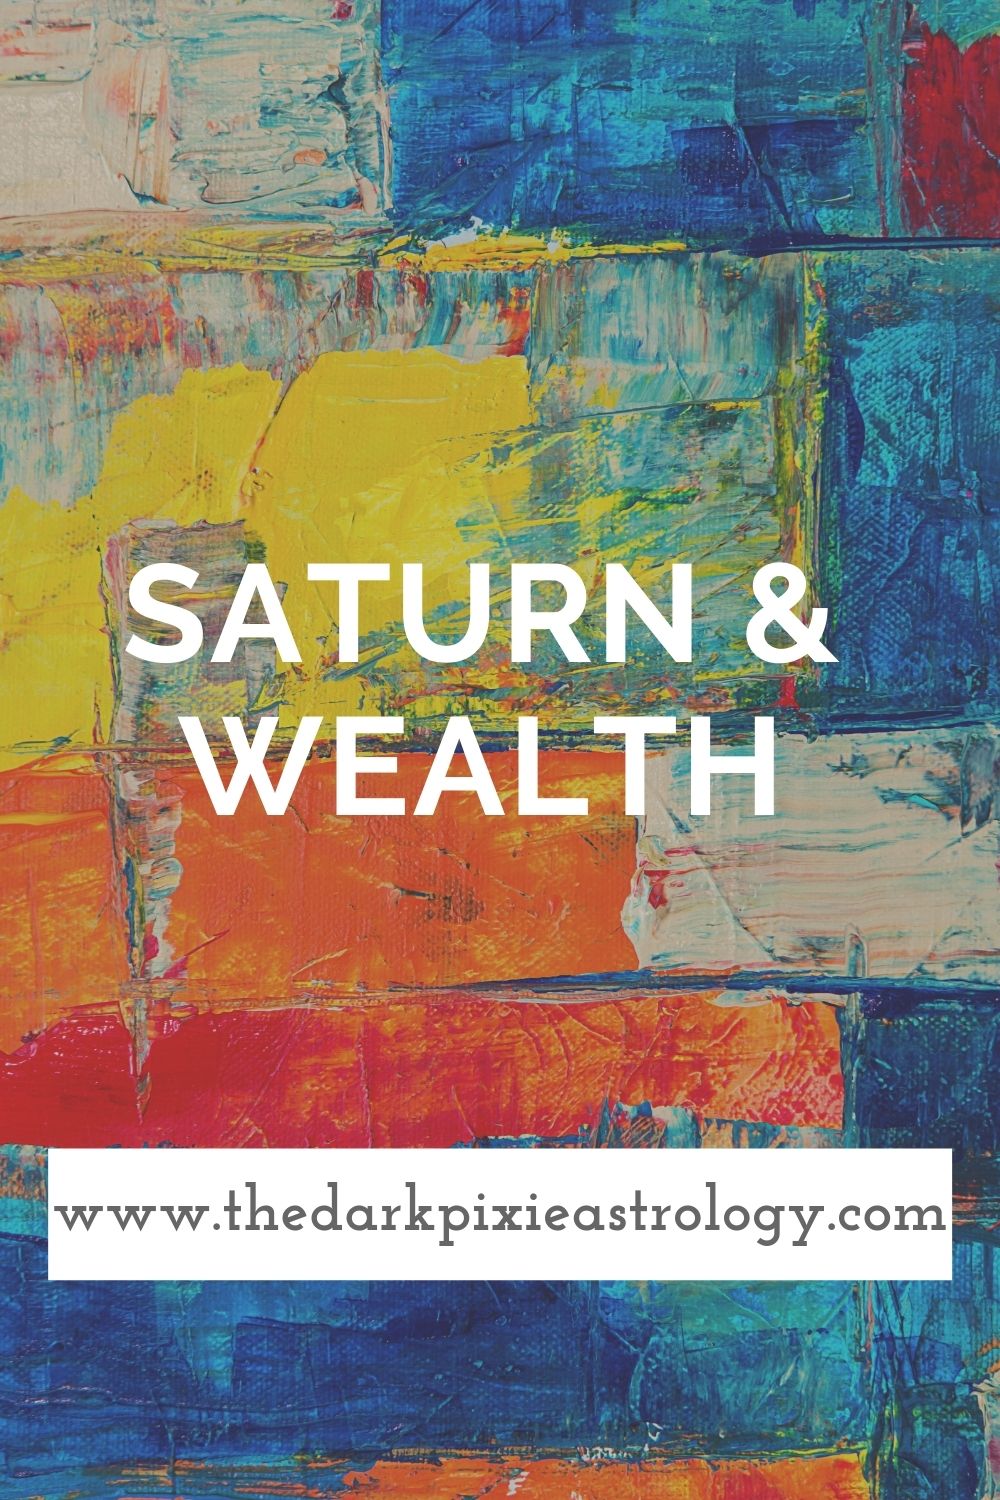 Saturn & Money: Does Saturn Give Wealth? - The Dark Pixie Astrology